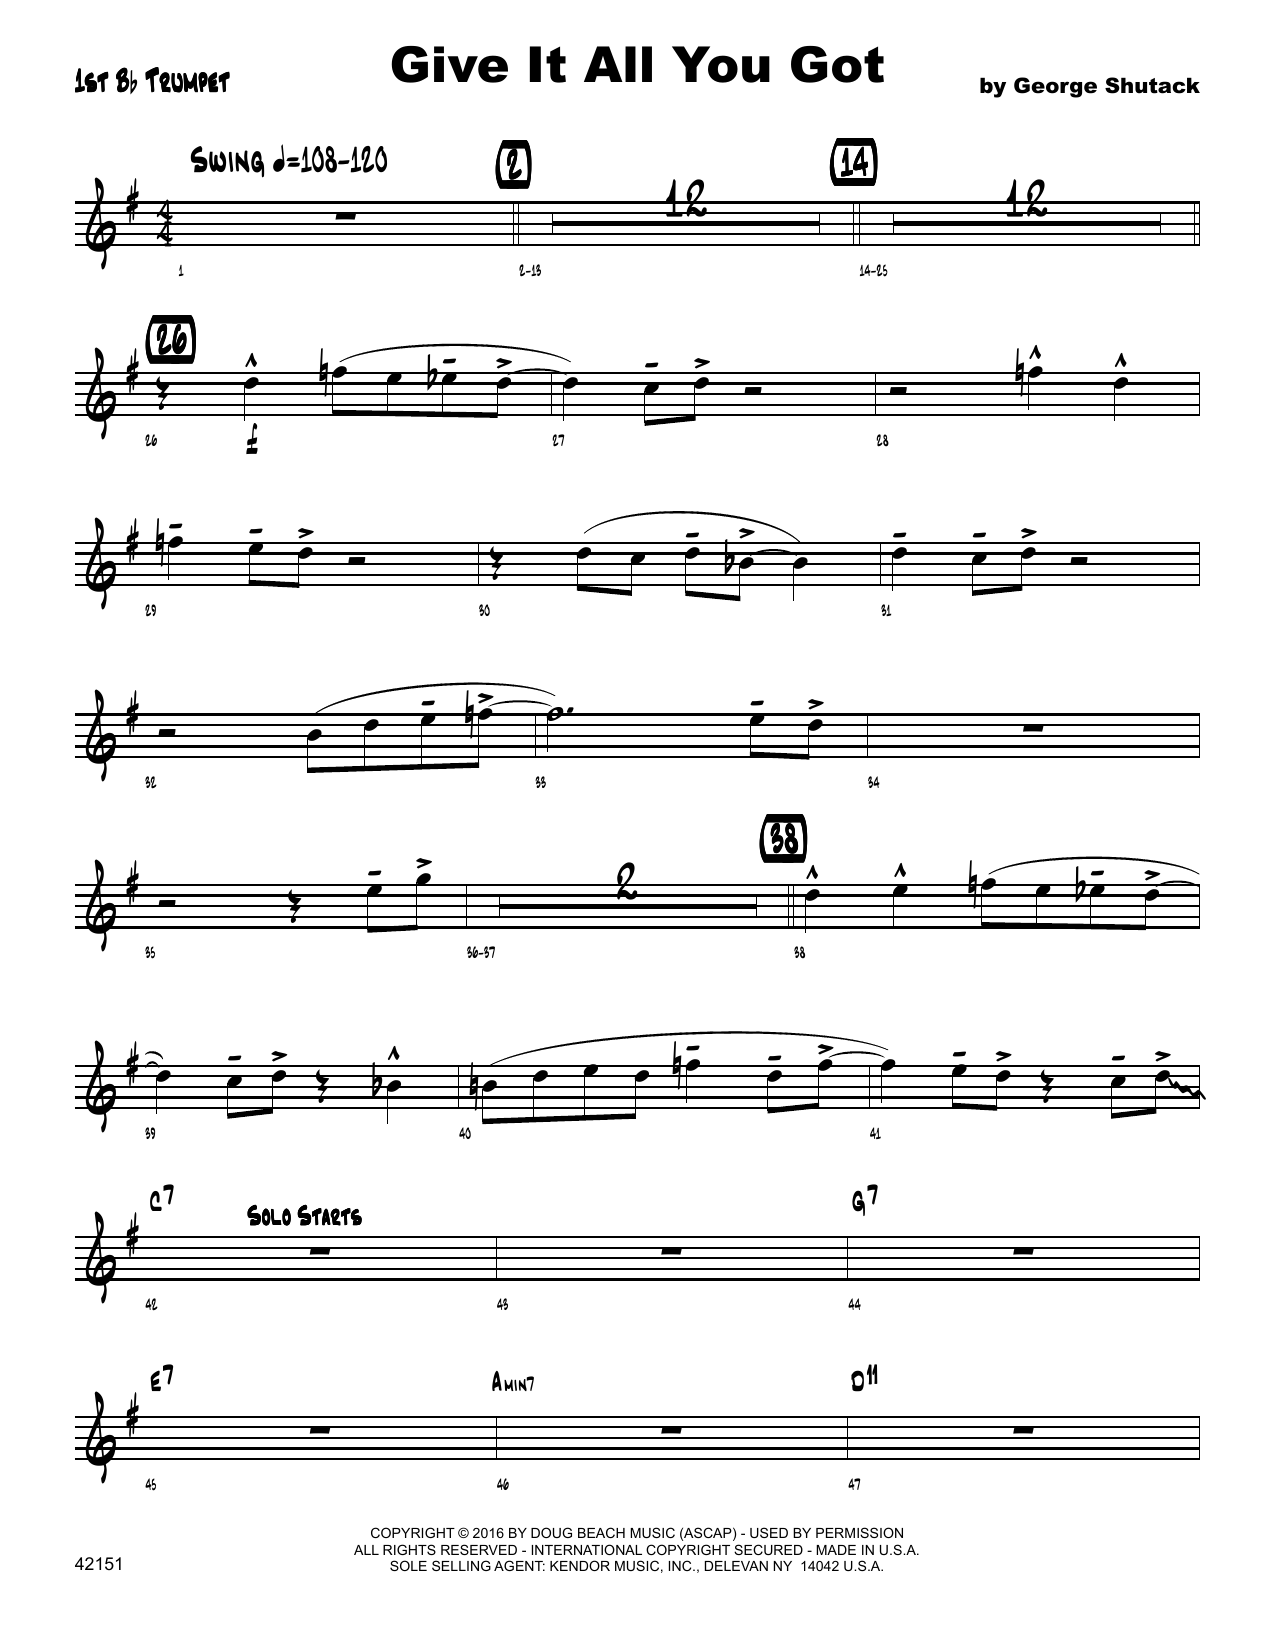 Download George Shutack Give It All You Got - 1st Bb Trumpet Sheet Music